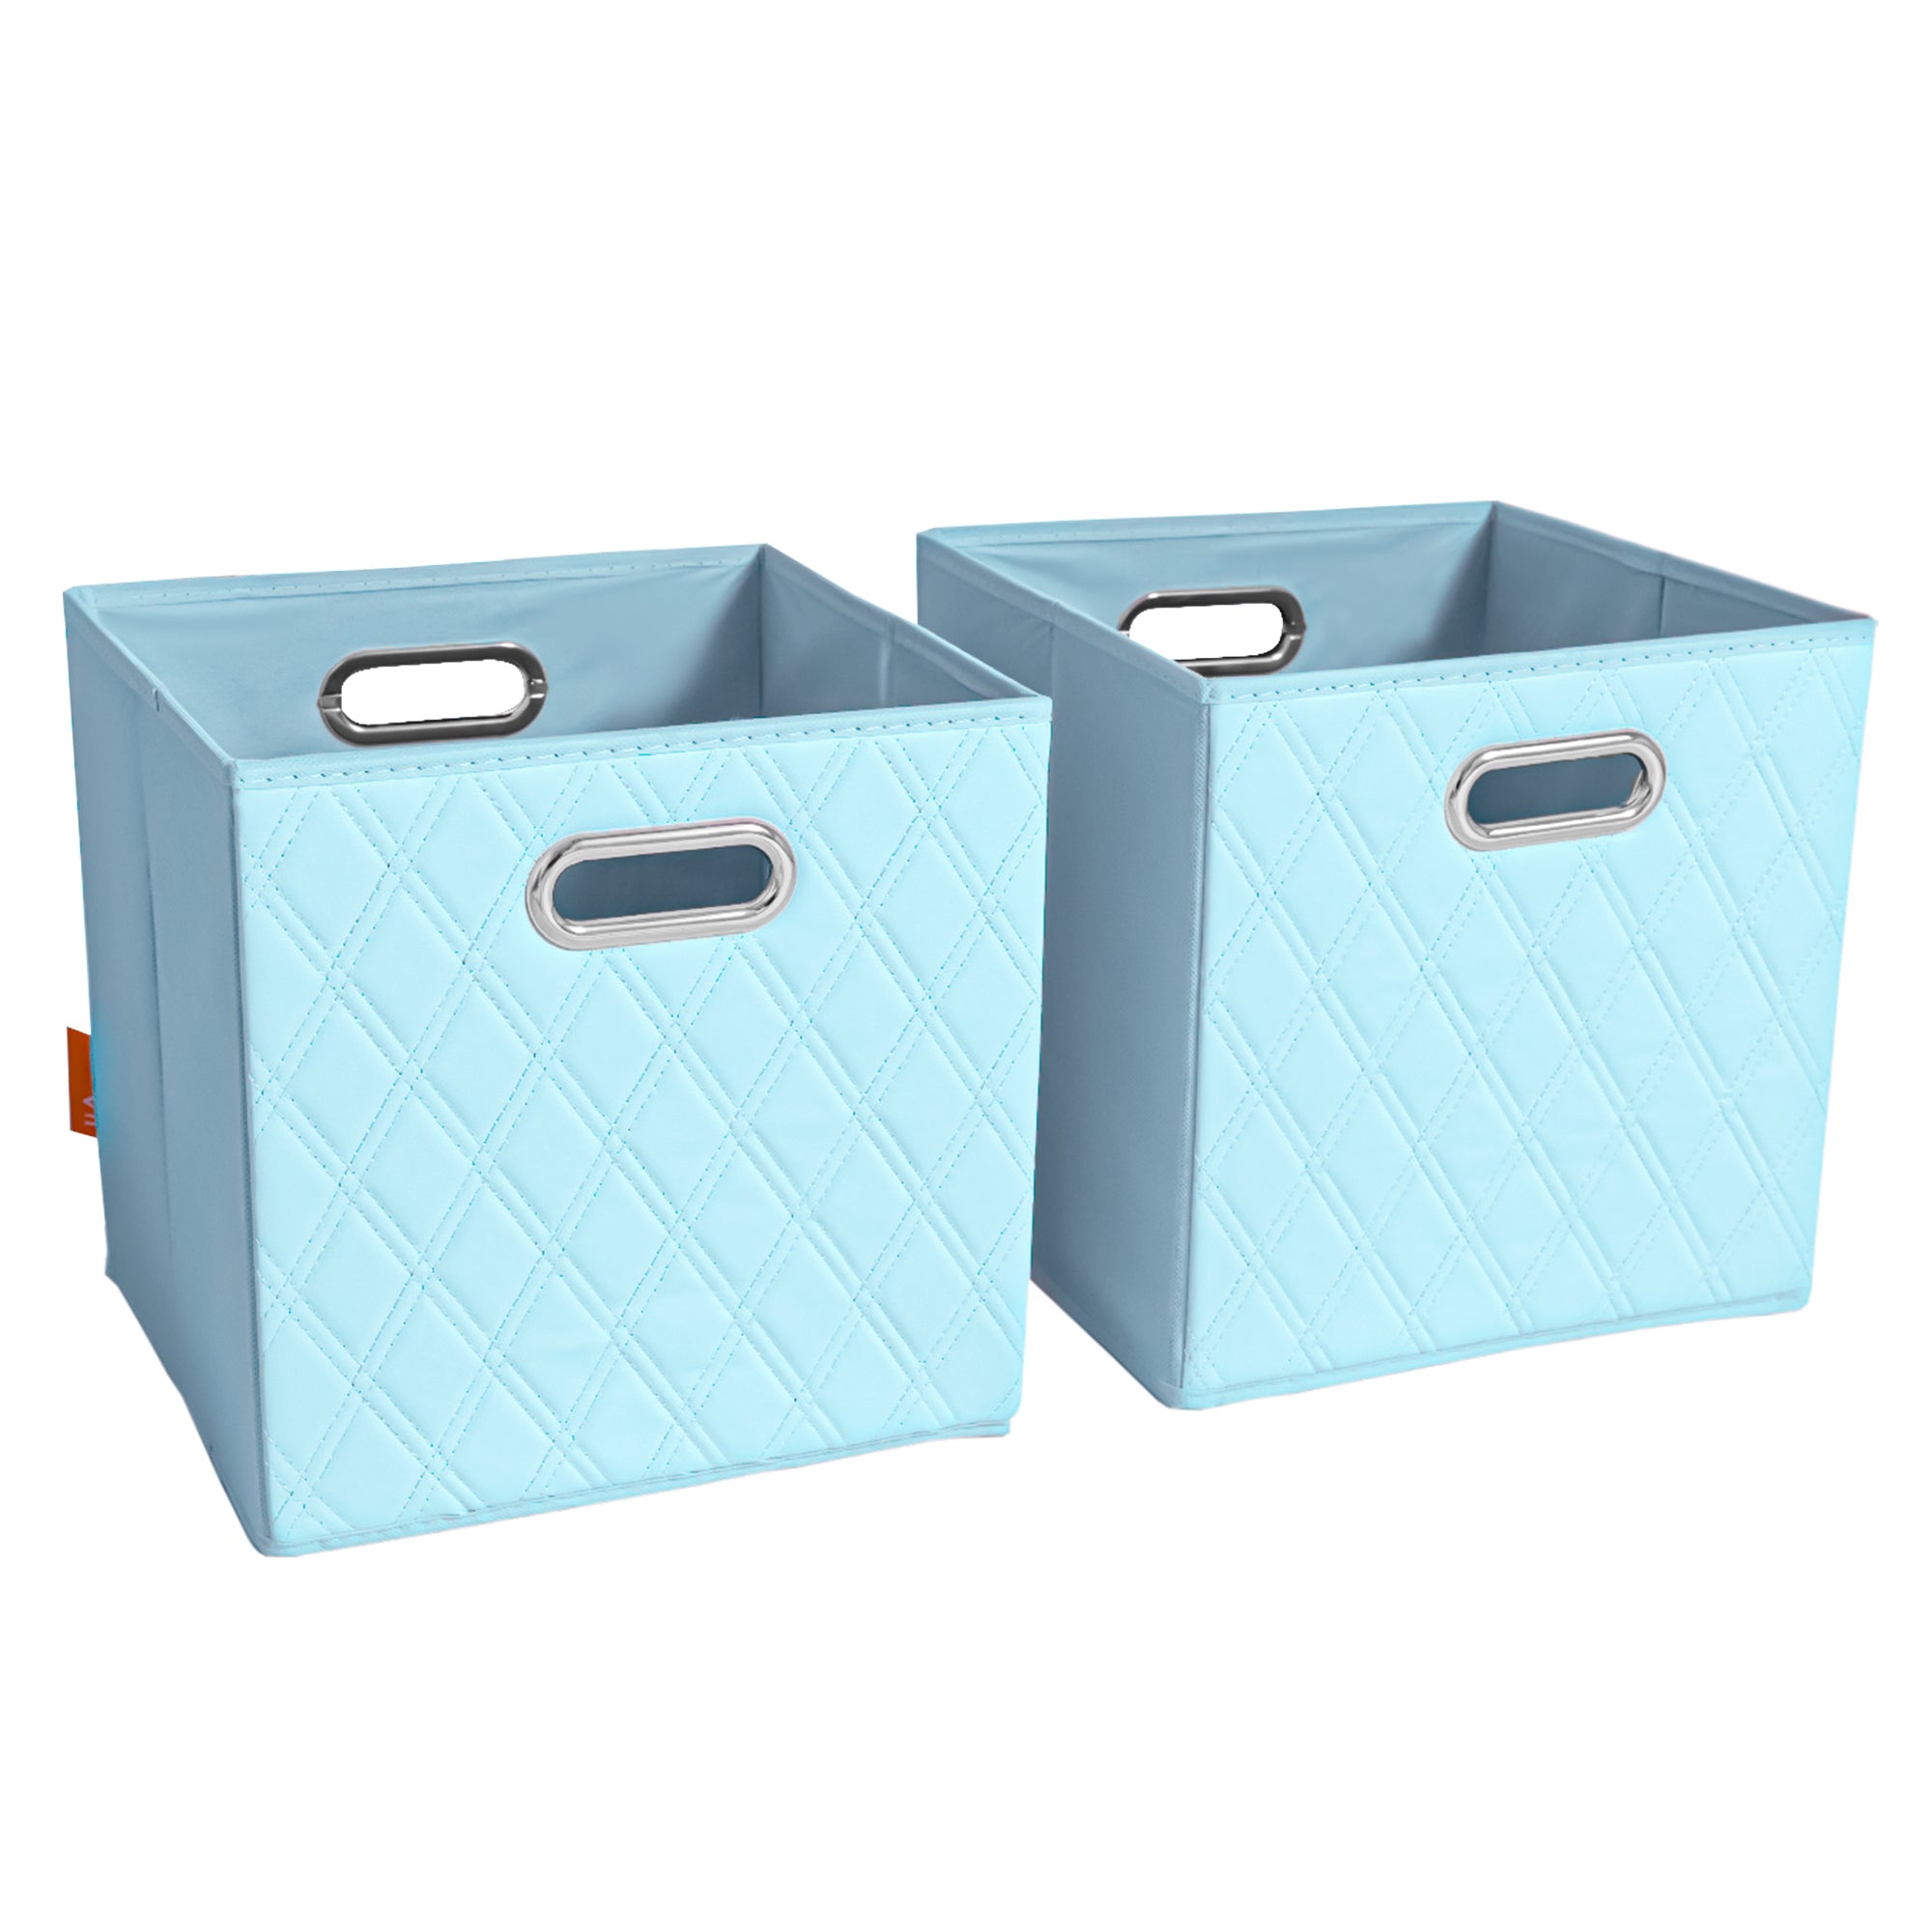 JIAessentials 12 inch Foldable Diamond Patterned Faux Leather Storage Cube Bins Set of Two with Dual Handles - 12" Blue